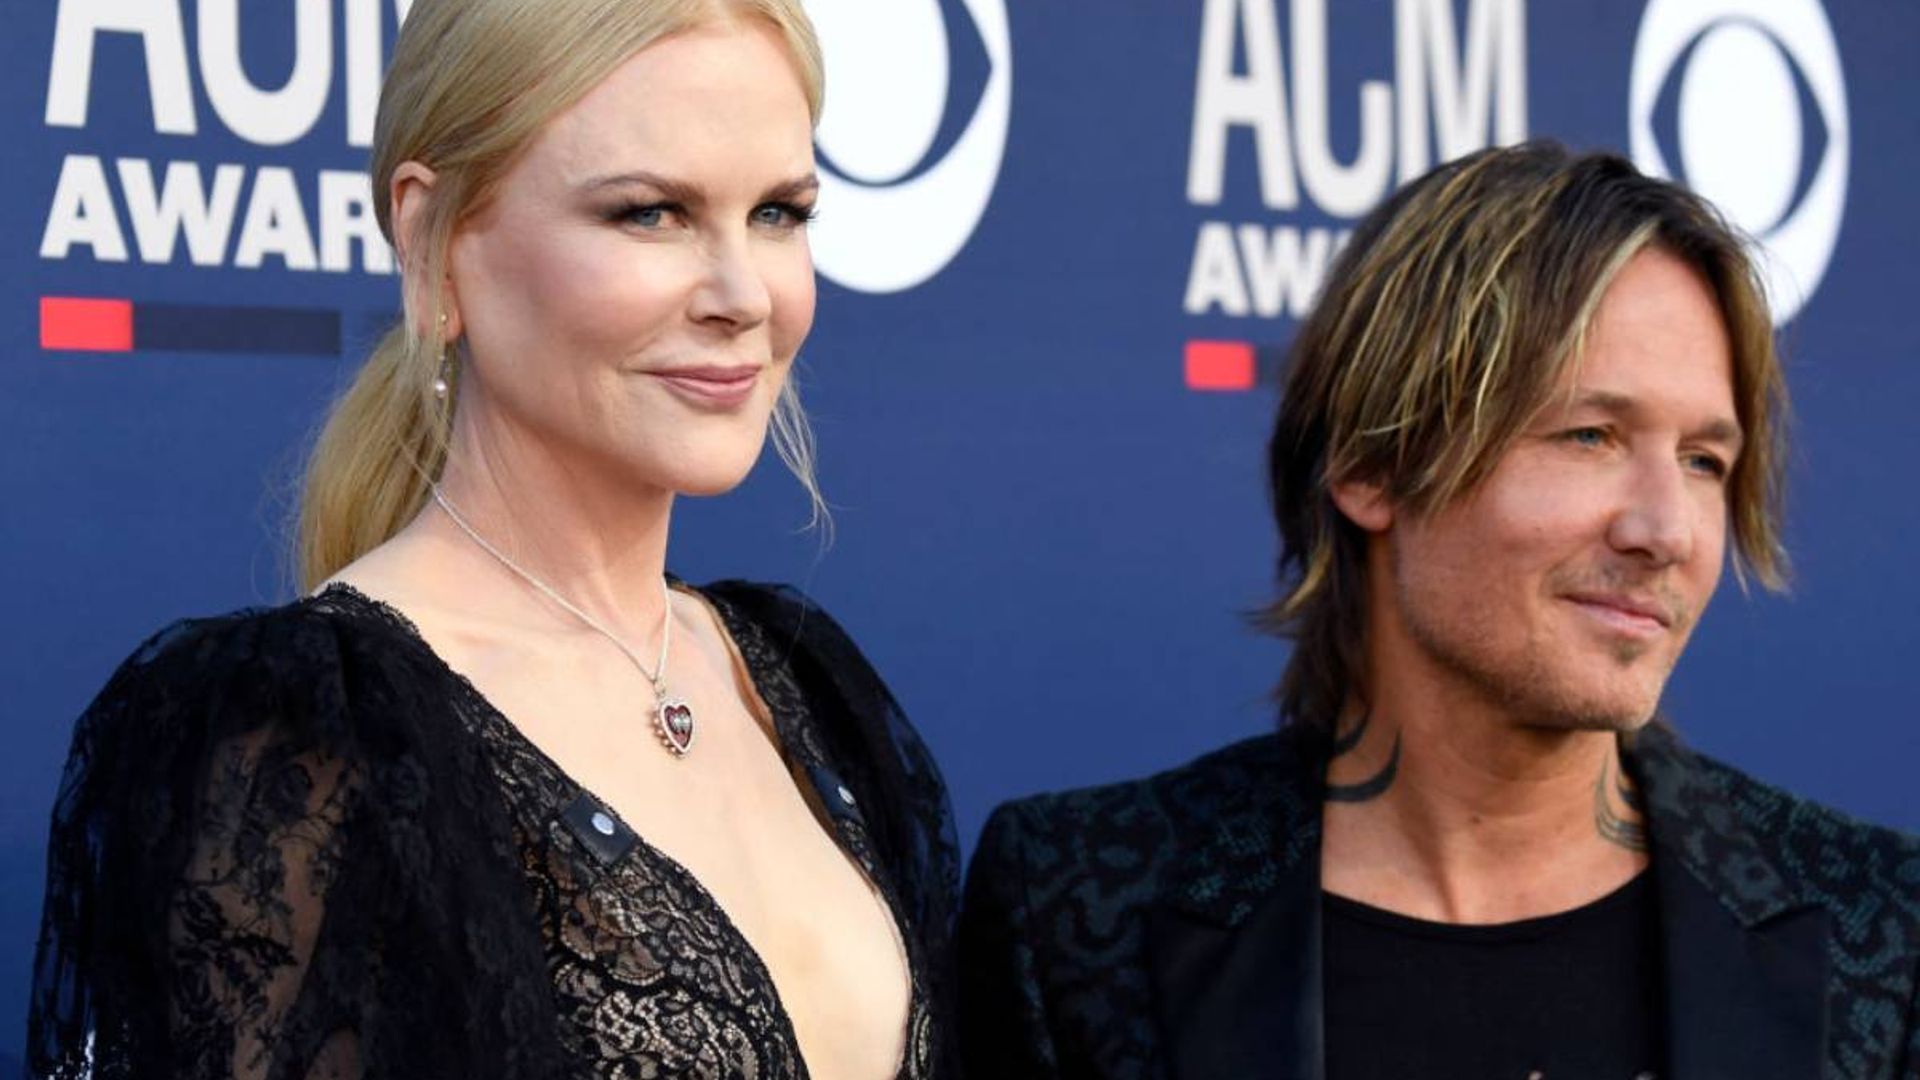 Keith Urban 'shocked and saddened' to learn of Charlie Watts' death